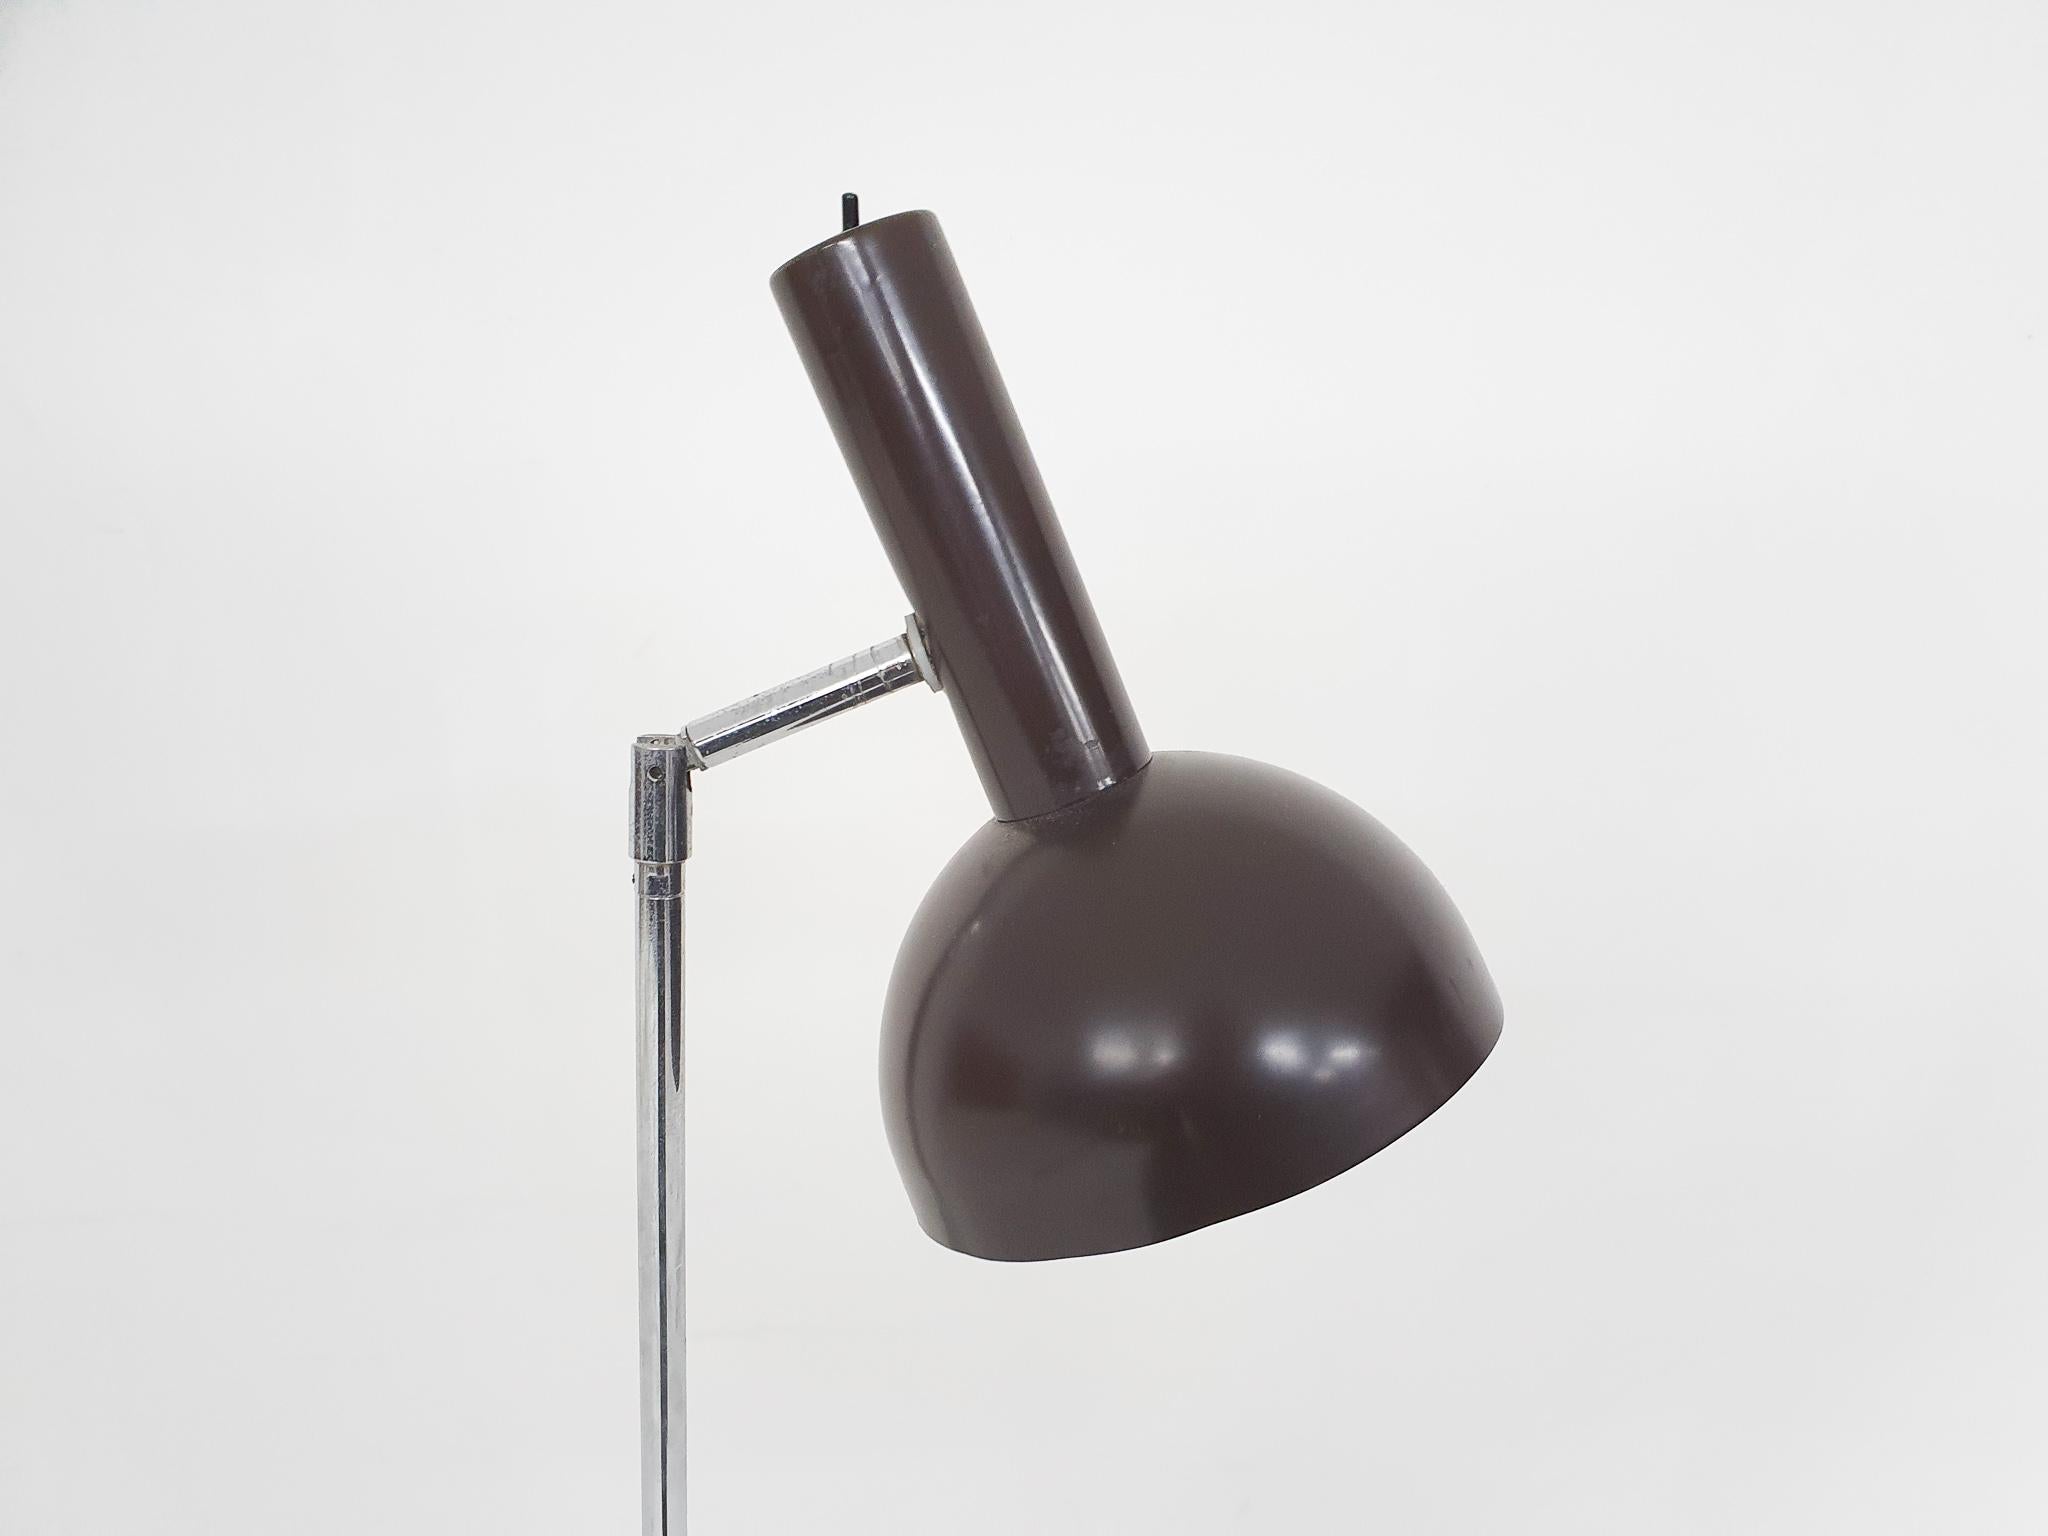 Mid-Century Modern Mid-Century Adjustable Floor Lamp by Busquet for Hala, the Netherlands, 1950's For Sale